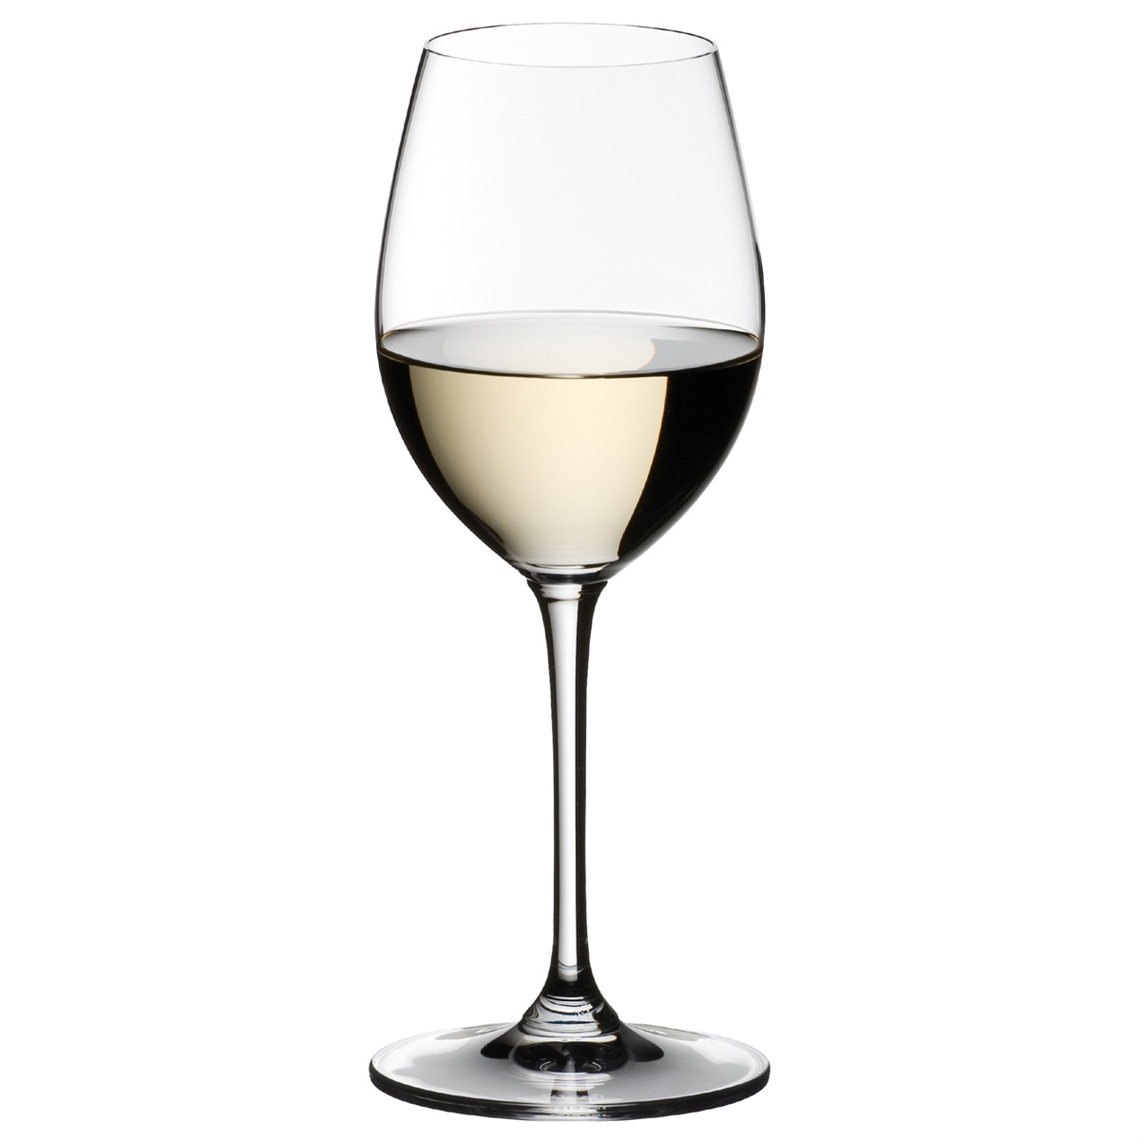 View more stolzle from our Dessert Wine Glasses range